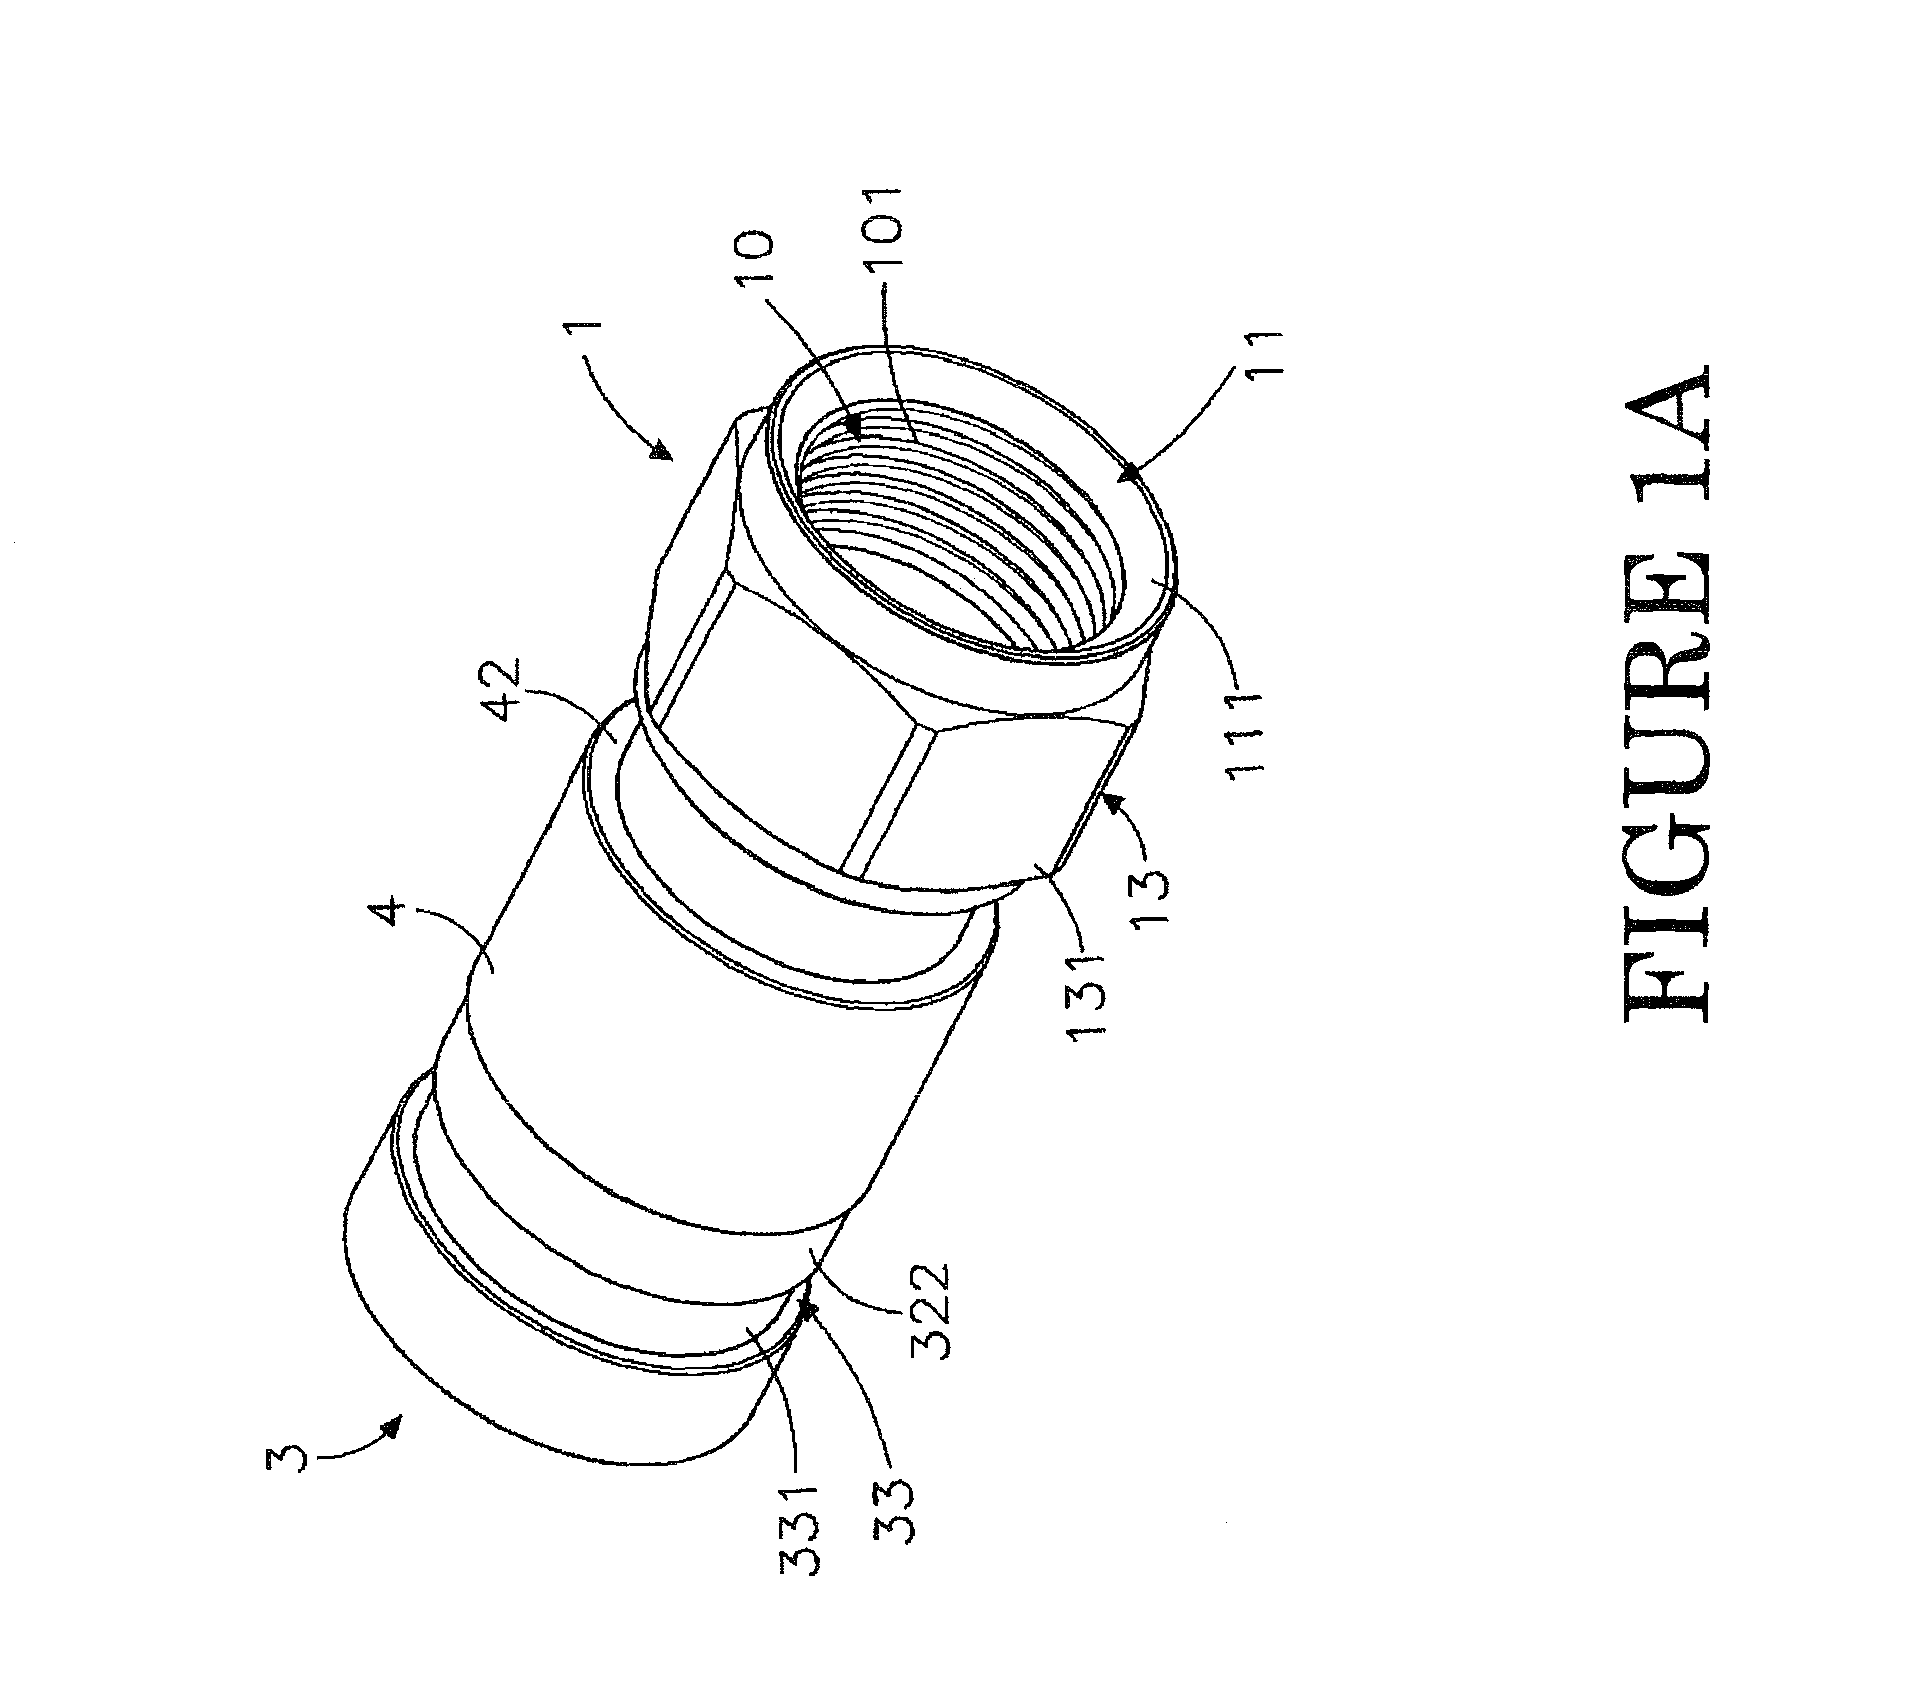 Coaxial cable connector having a barrel to deform a portion of a casing for crimping a coaxial cable